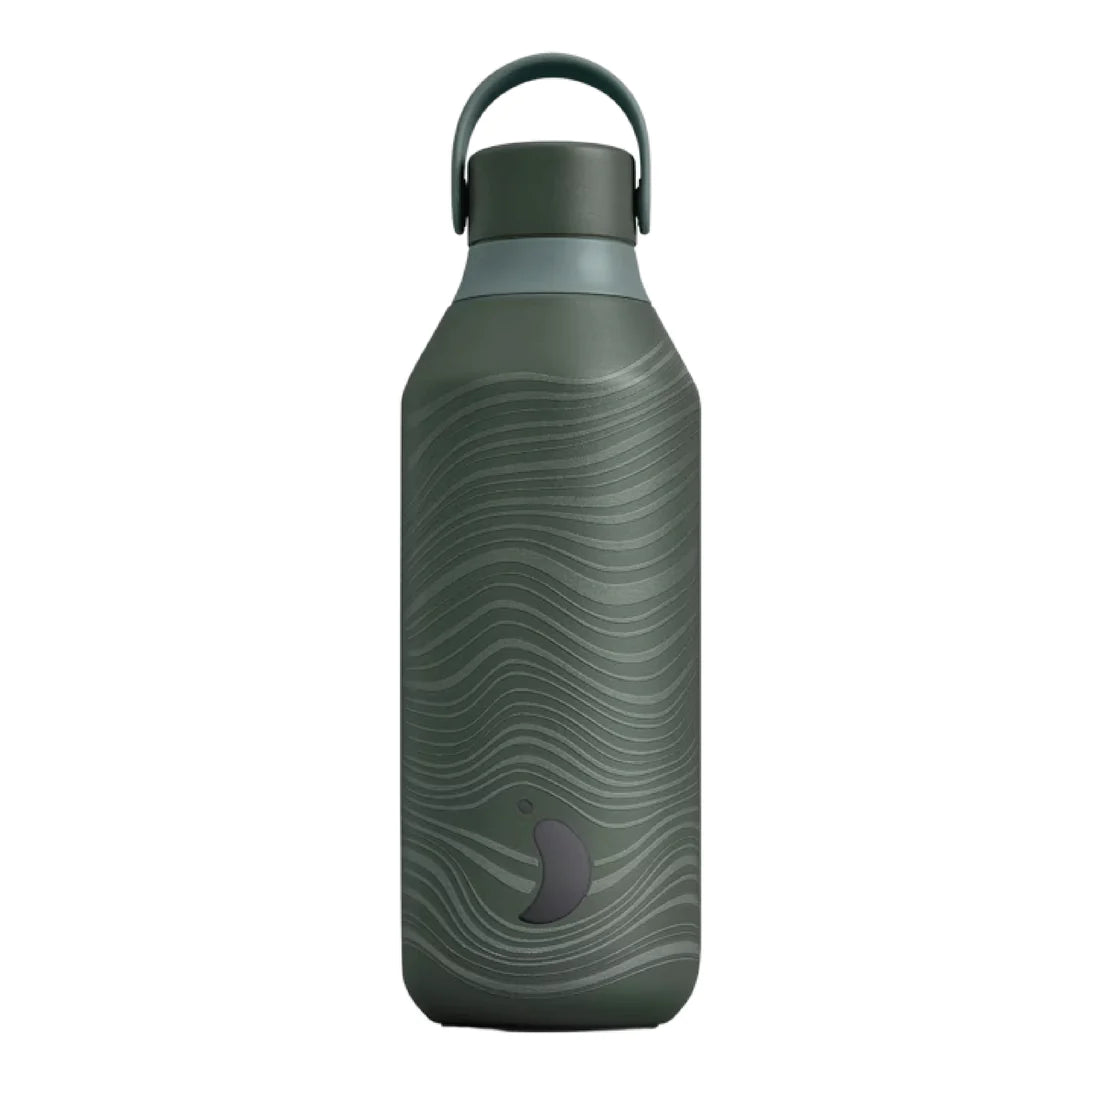 Chillys Series 2 Elements Wind Grey 500ml Reusable Water Bottle